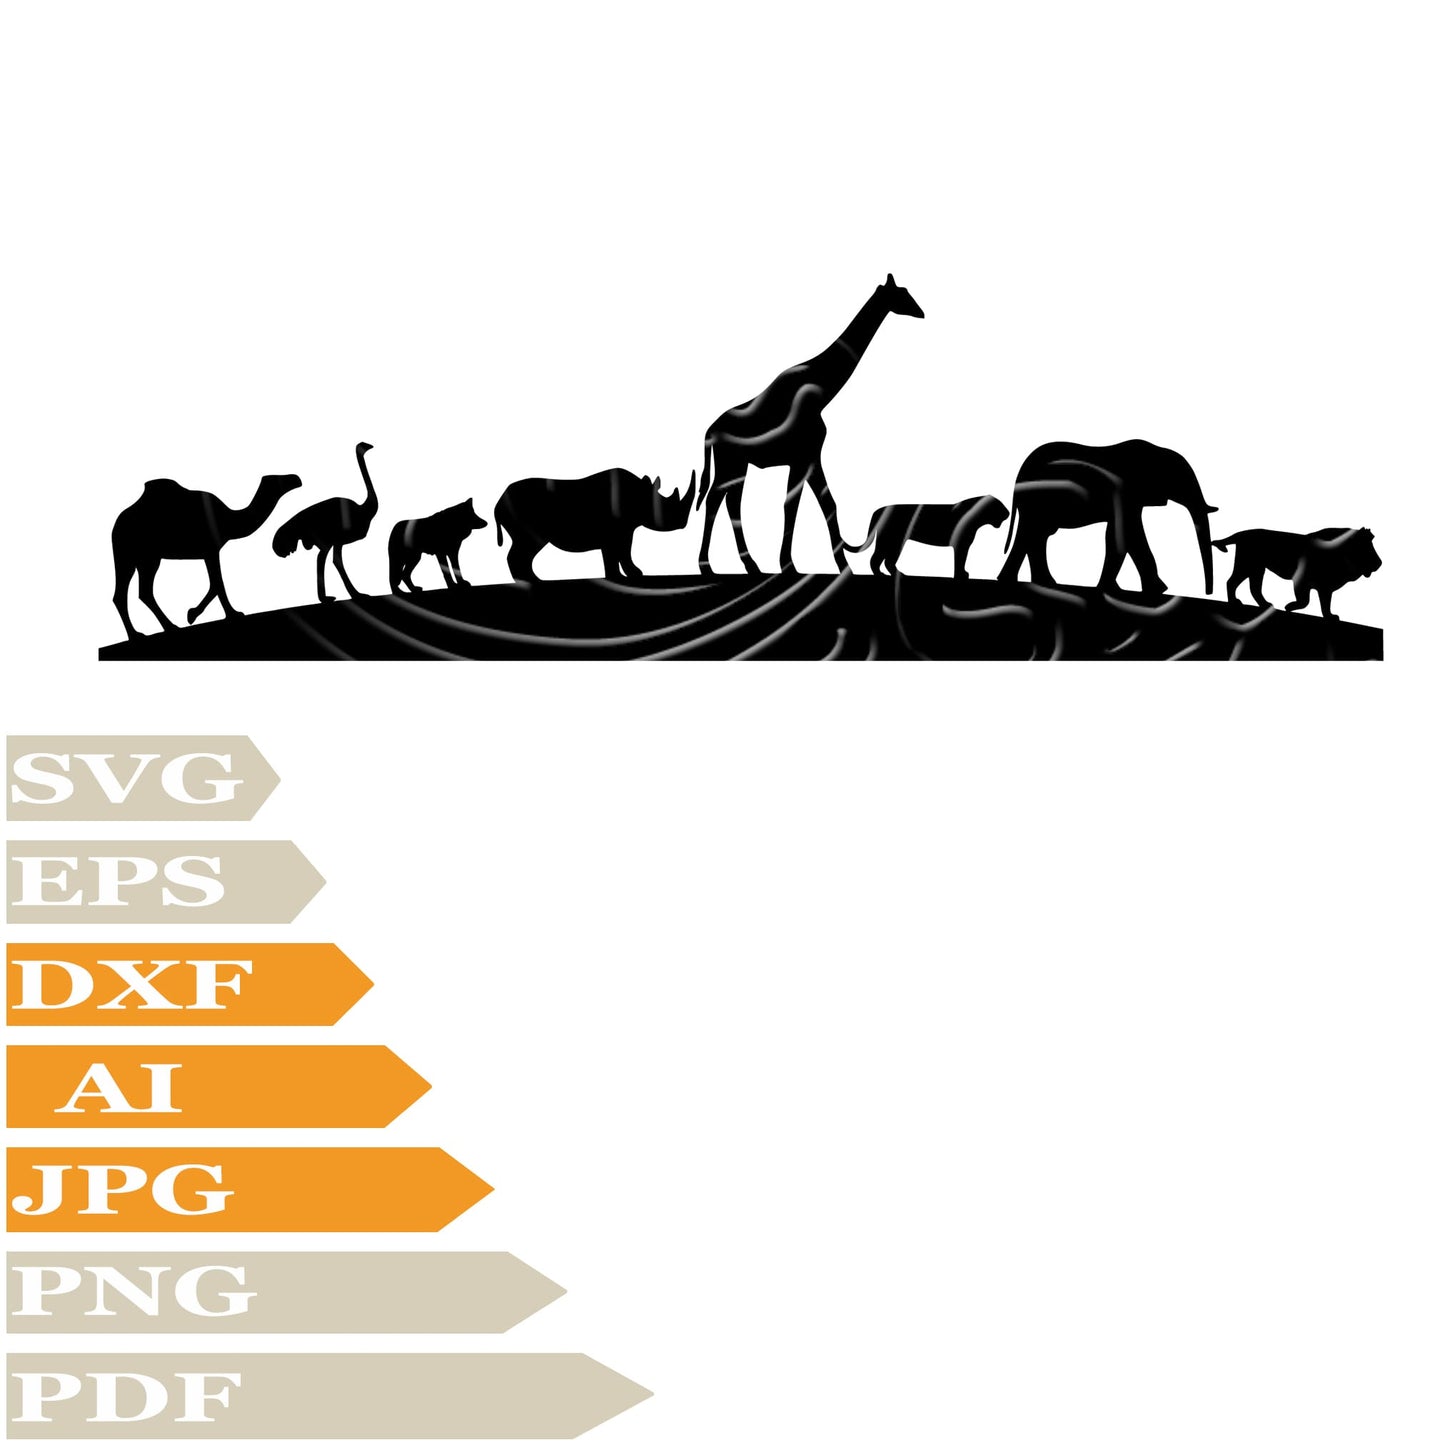 Arican Animals, Lion Elephant Giraffe Camel Svg File, Image Cut, Png, For Tattoo, Silhouette, Digital Vector Download, Cut File, Clipart, For Cricut